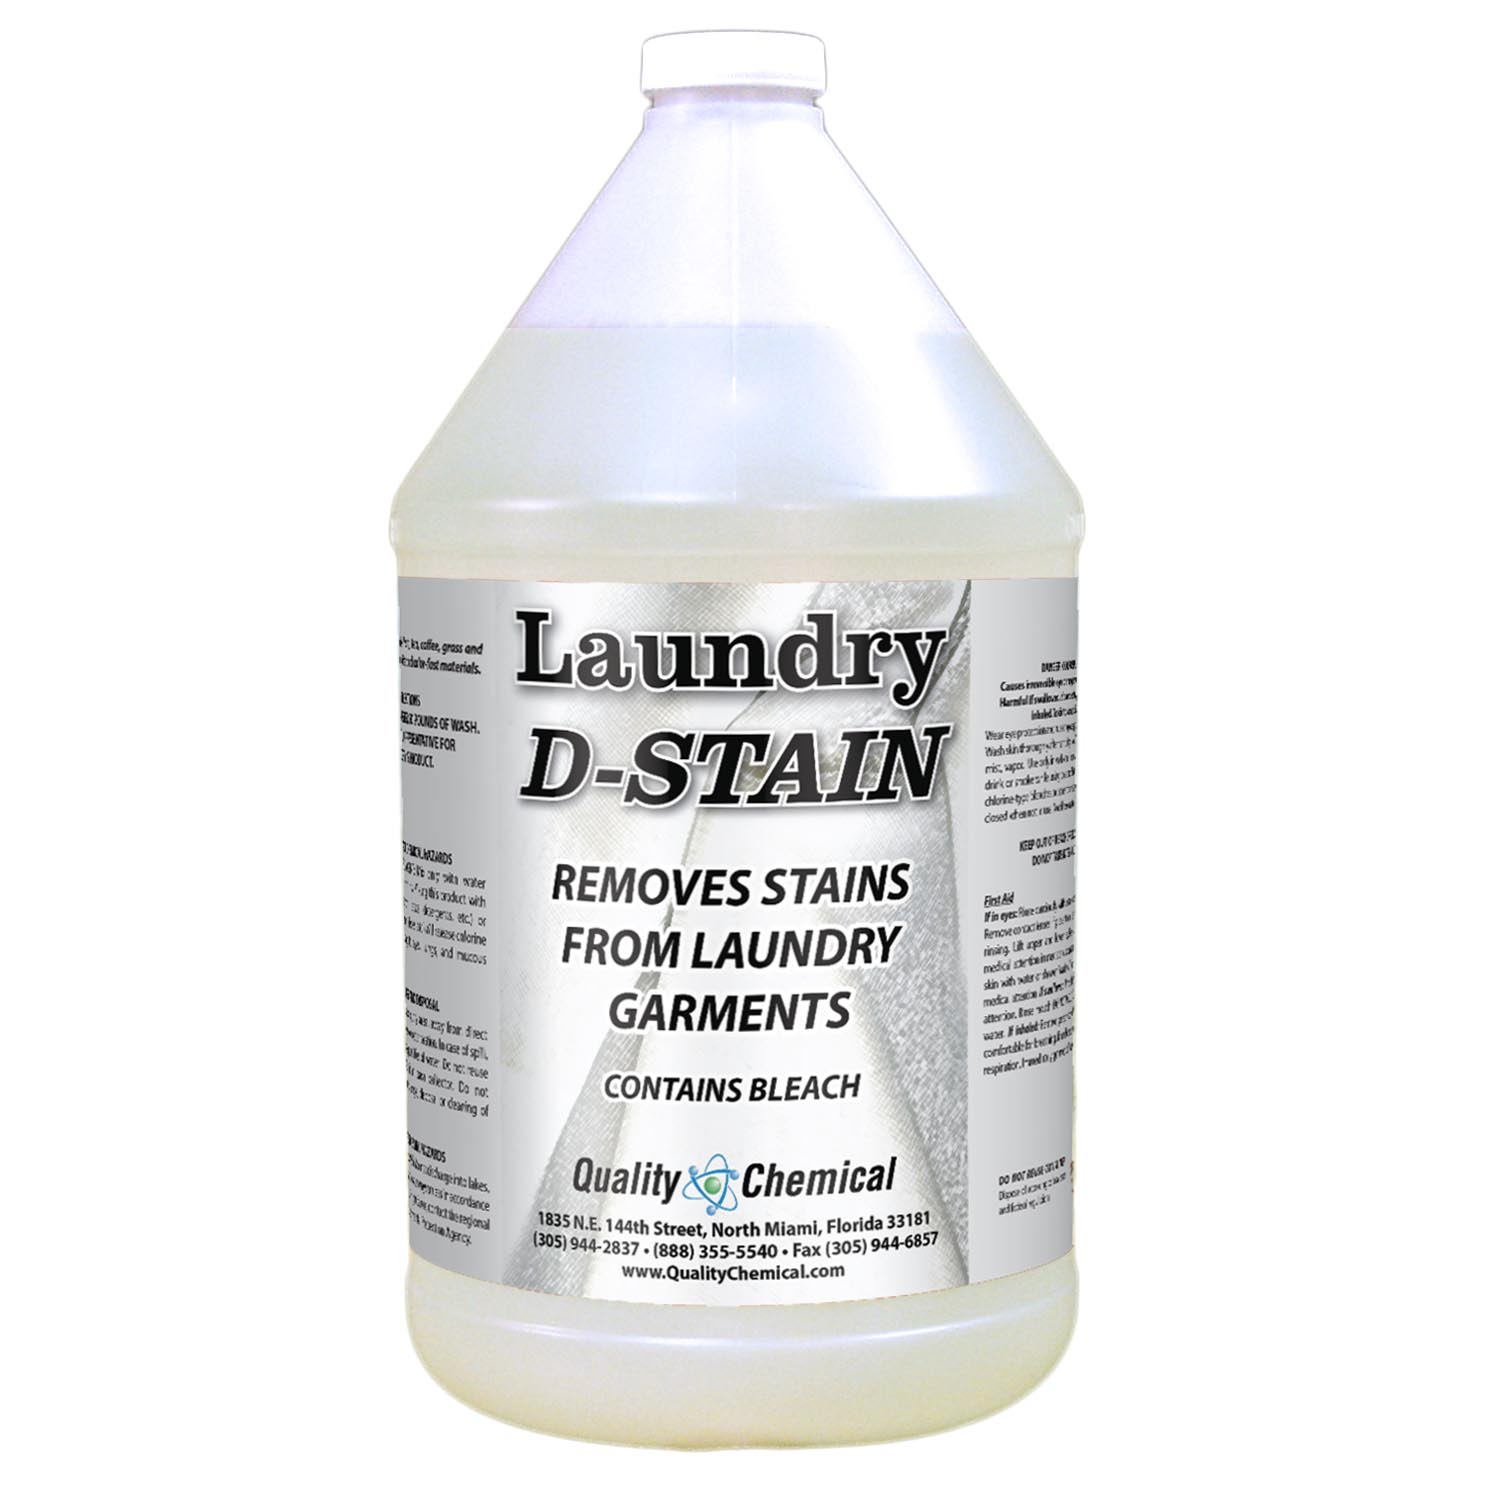 Laundry D-Stain